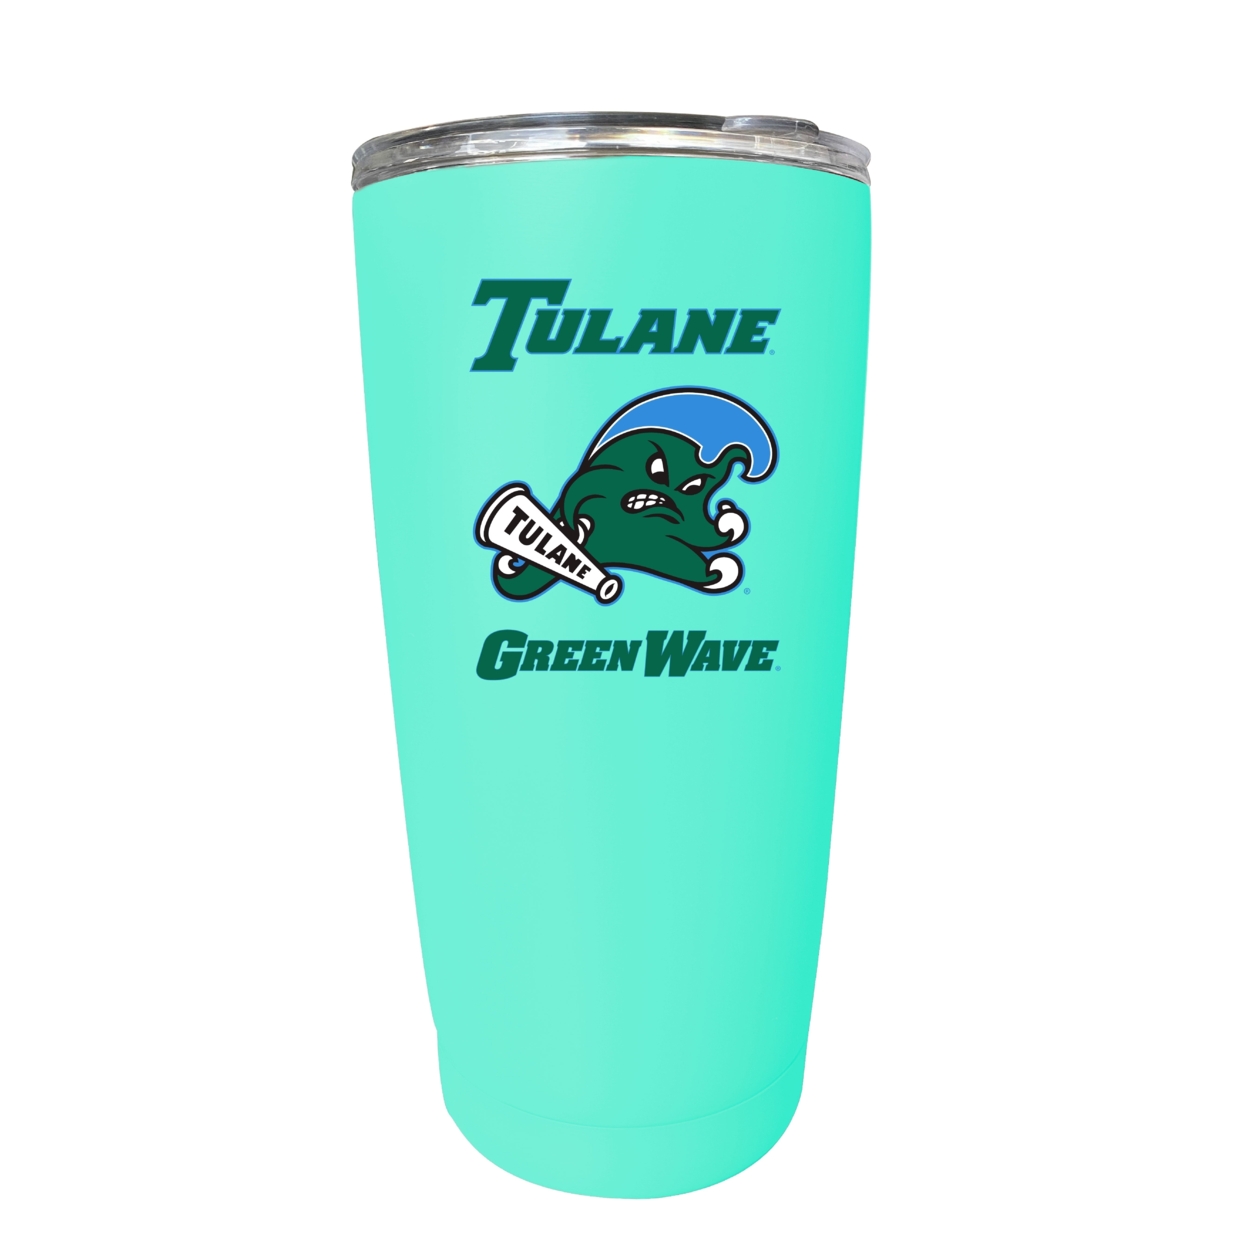 Tulane University Green Wave 16 Oz Insulated Stainless Steel Tumbler - Choose Your Color. - Red